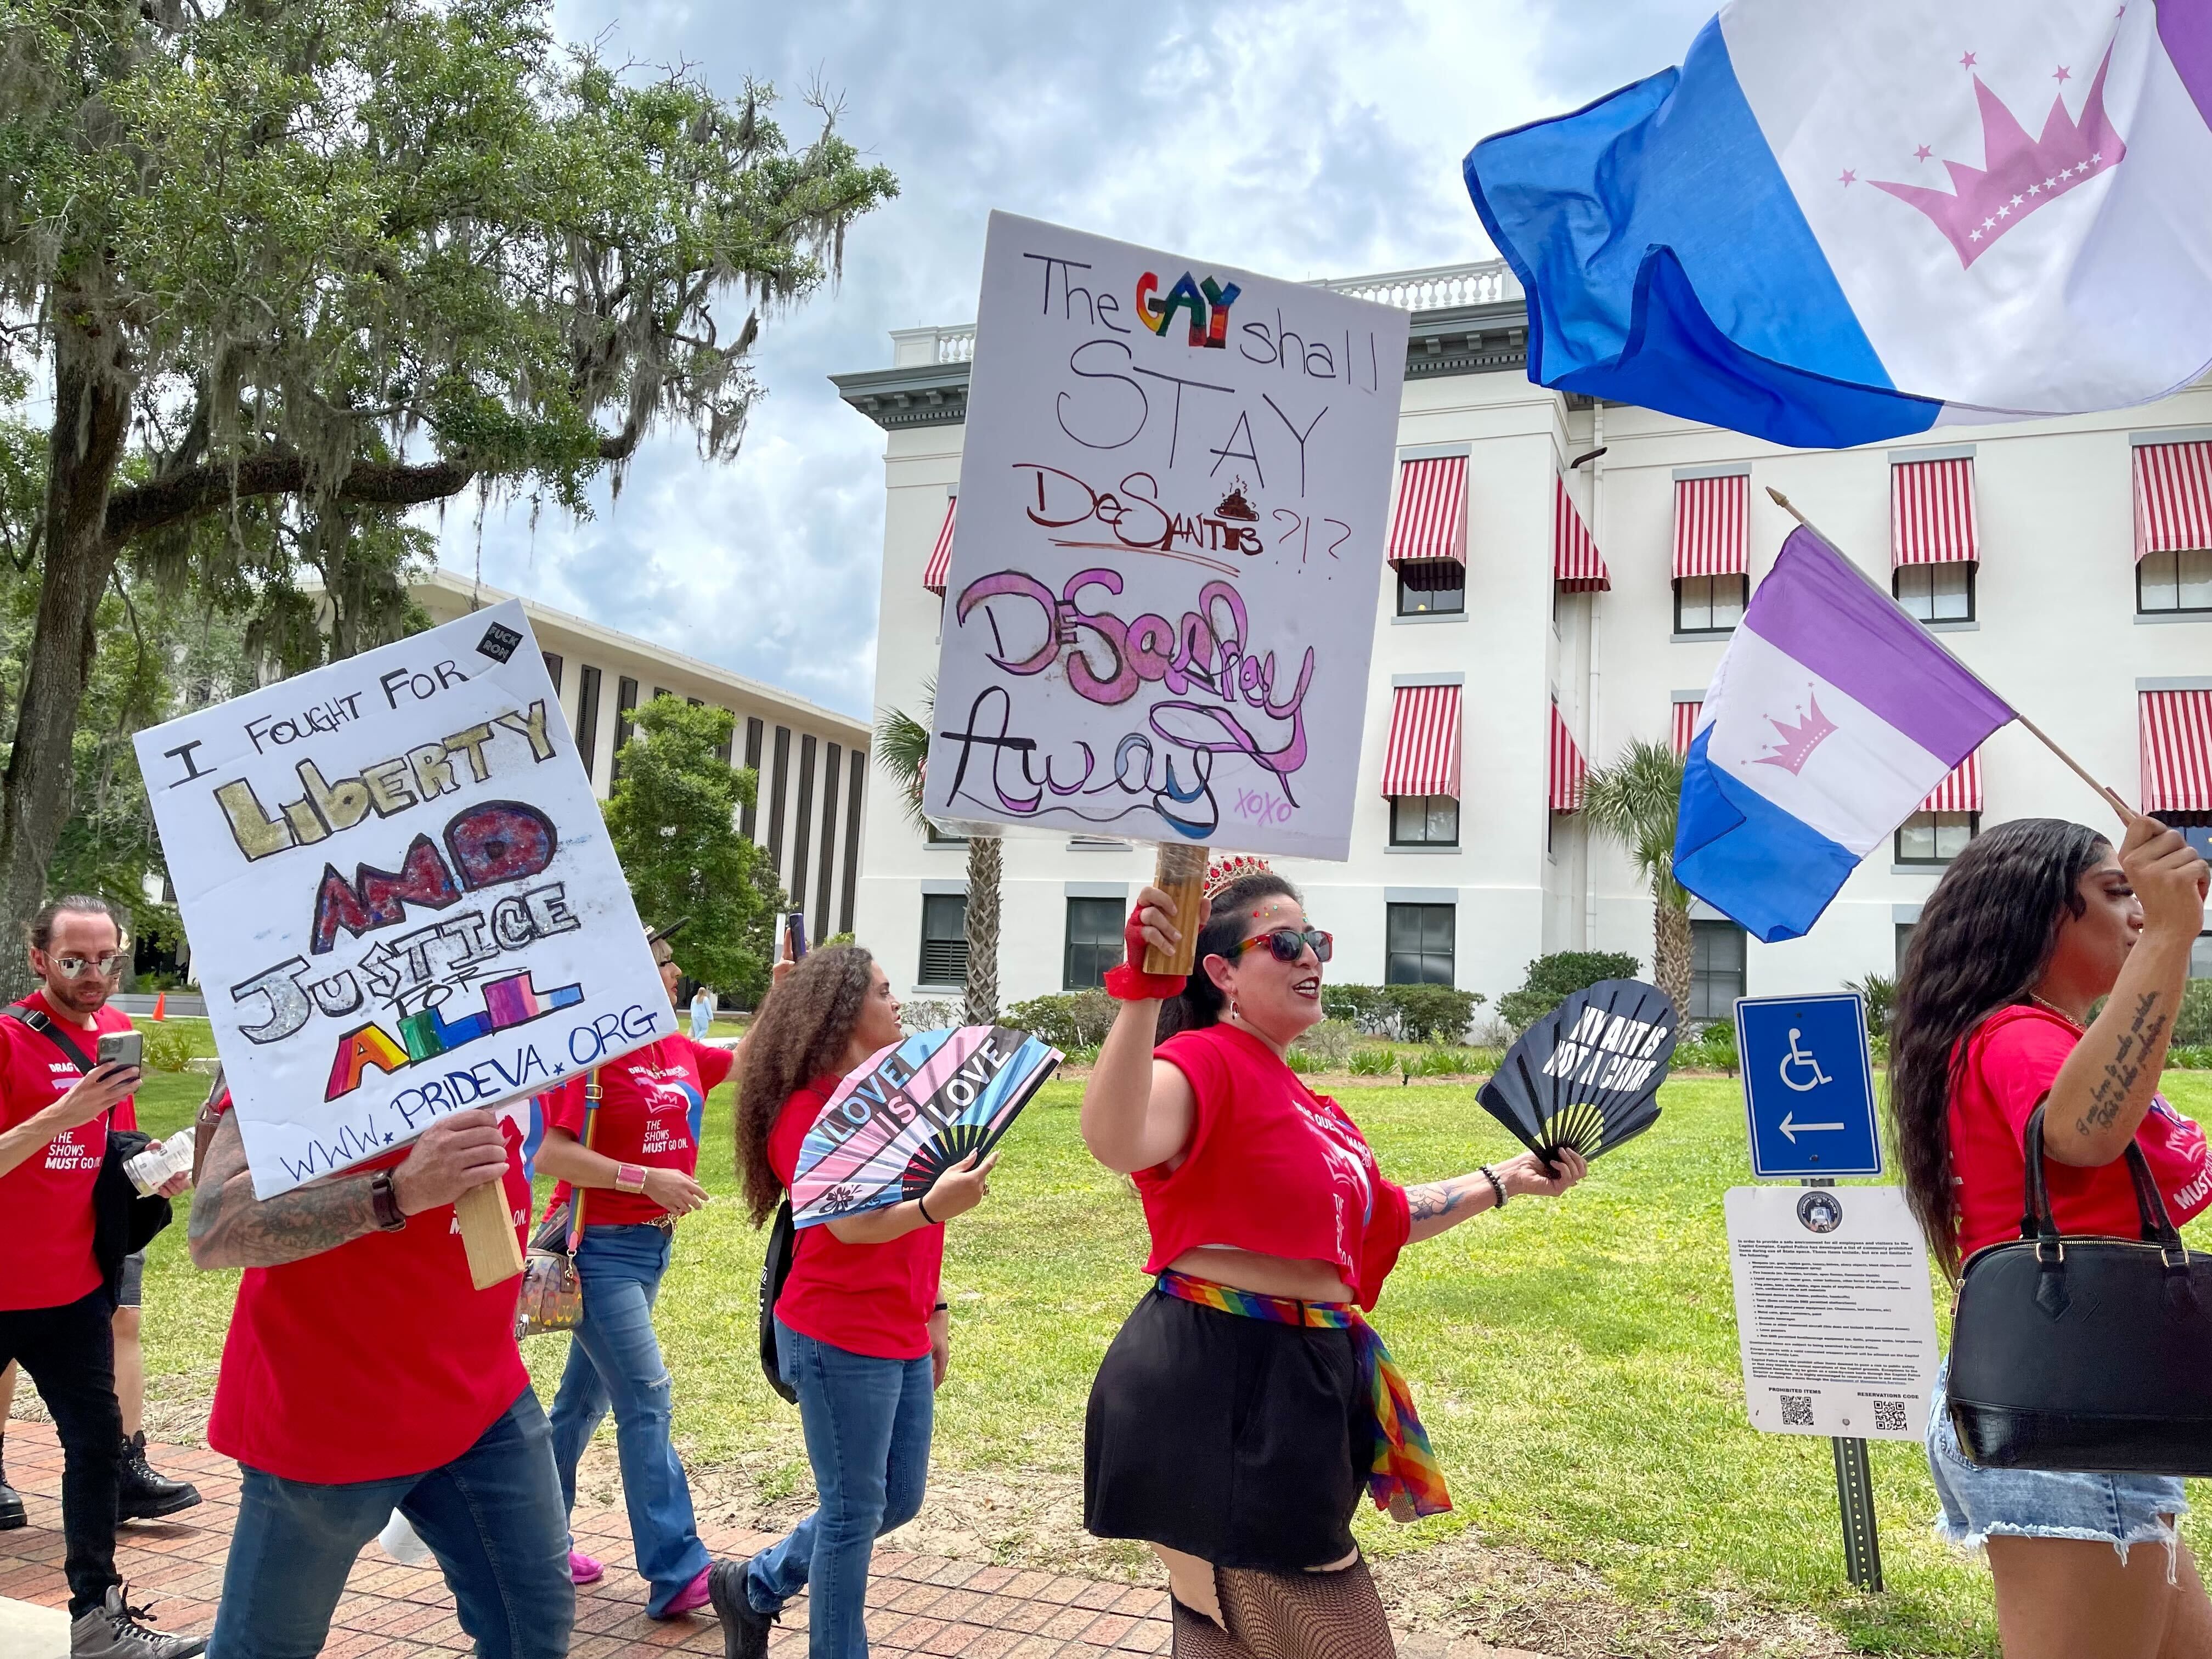 LGBTQ rights protesters wearing red shirts walk in a line with signs and flags.